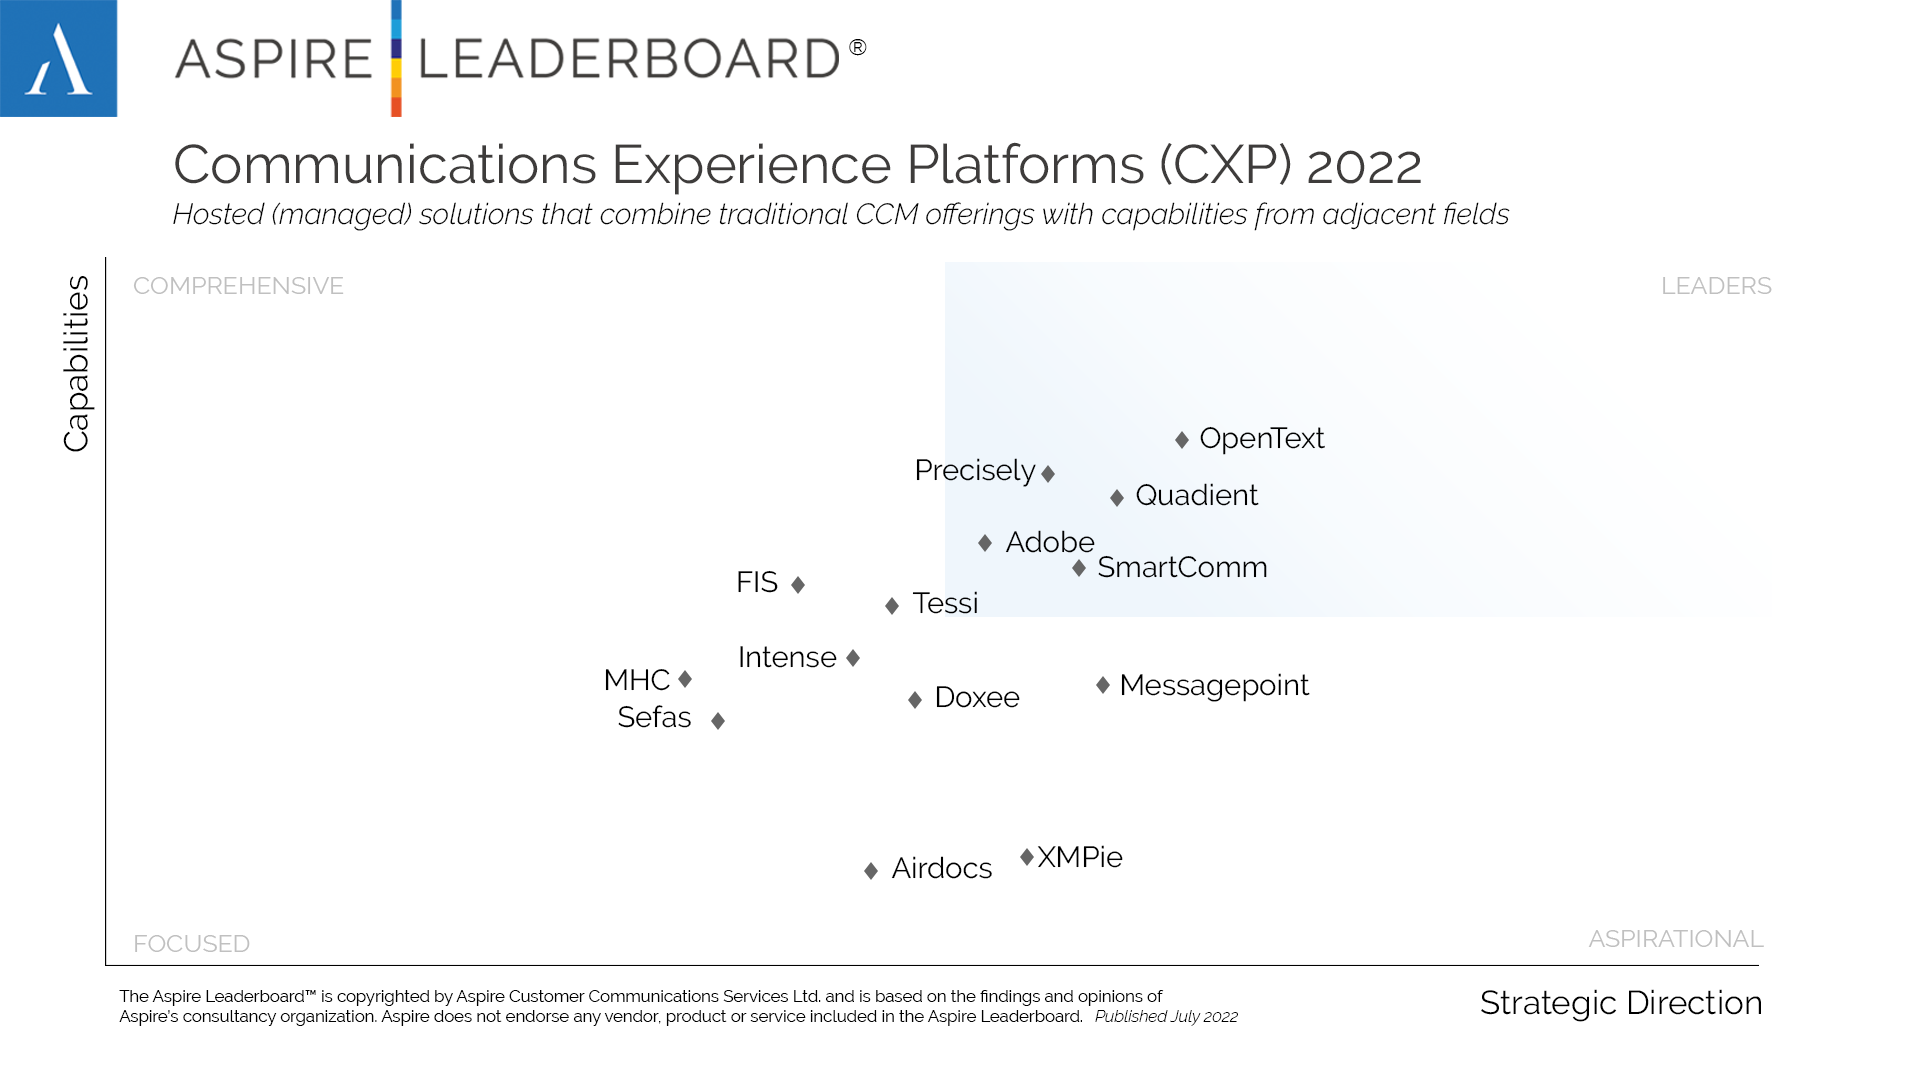 The Aspire Leaderboard graphic displays the Communications Experience Platforms (CXP) Grid for 2022 with OpenText in the upper right quadrant. 